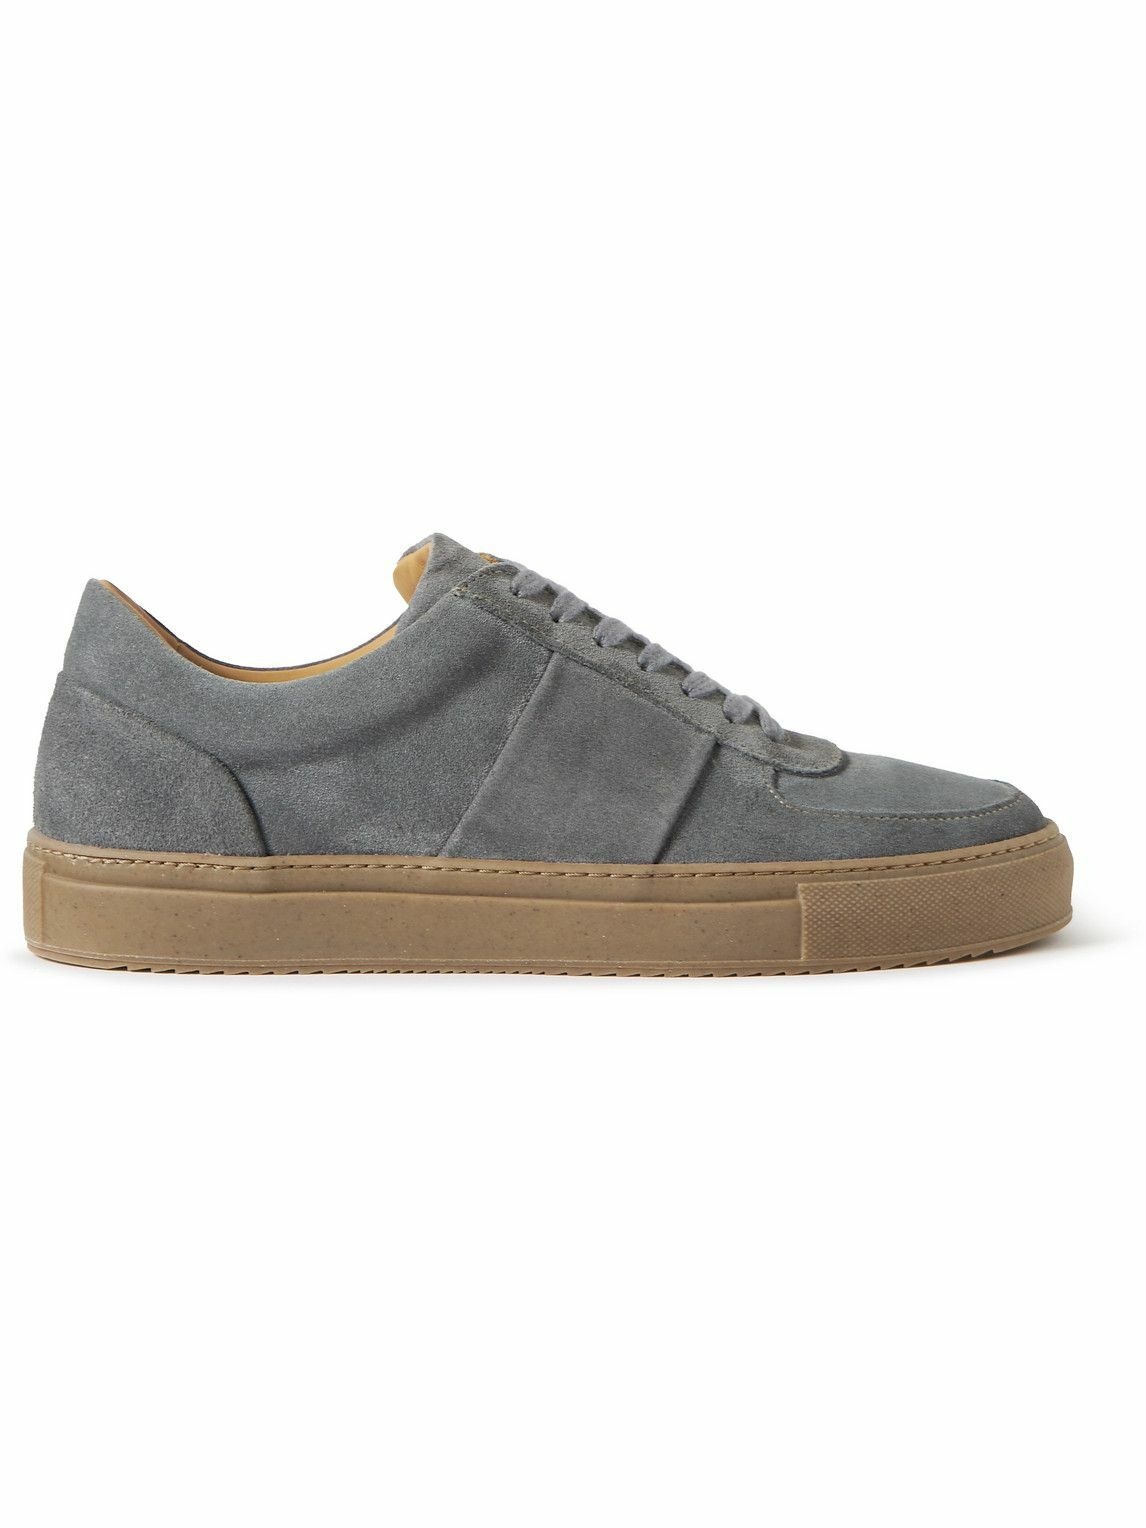 Mr P. - Larry Regenerated Suede by evolo® Sneakers - Gray Mr P.